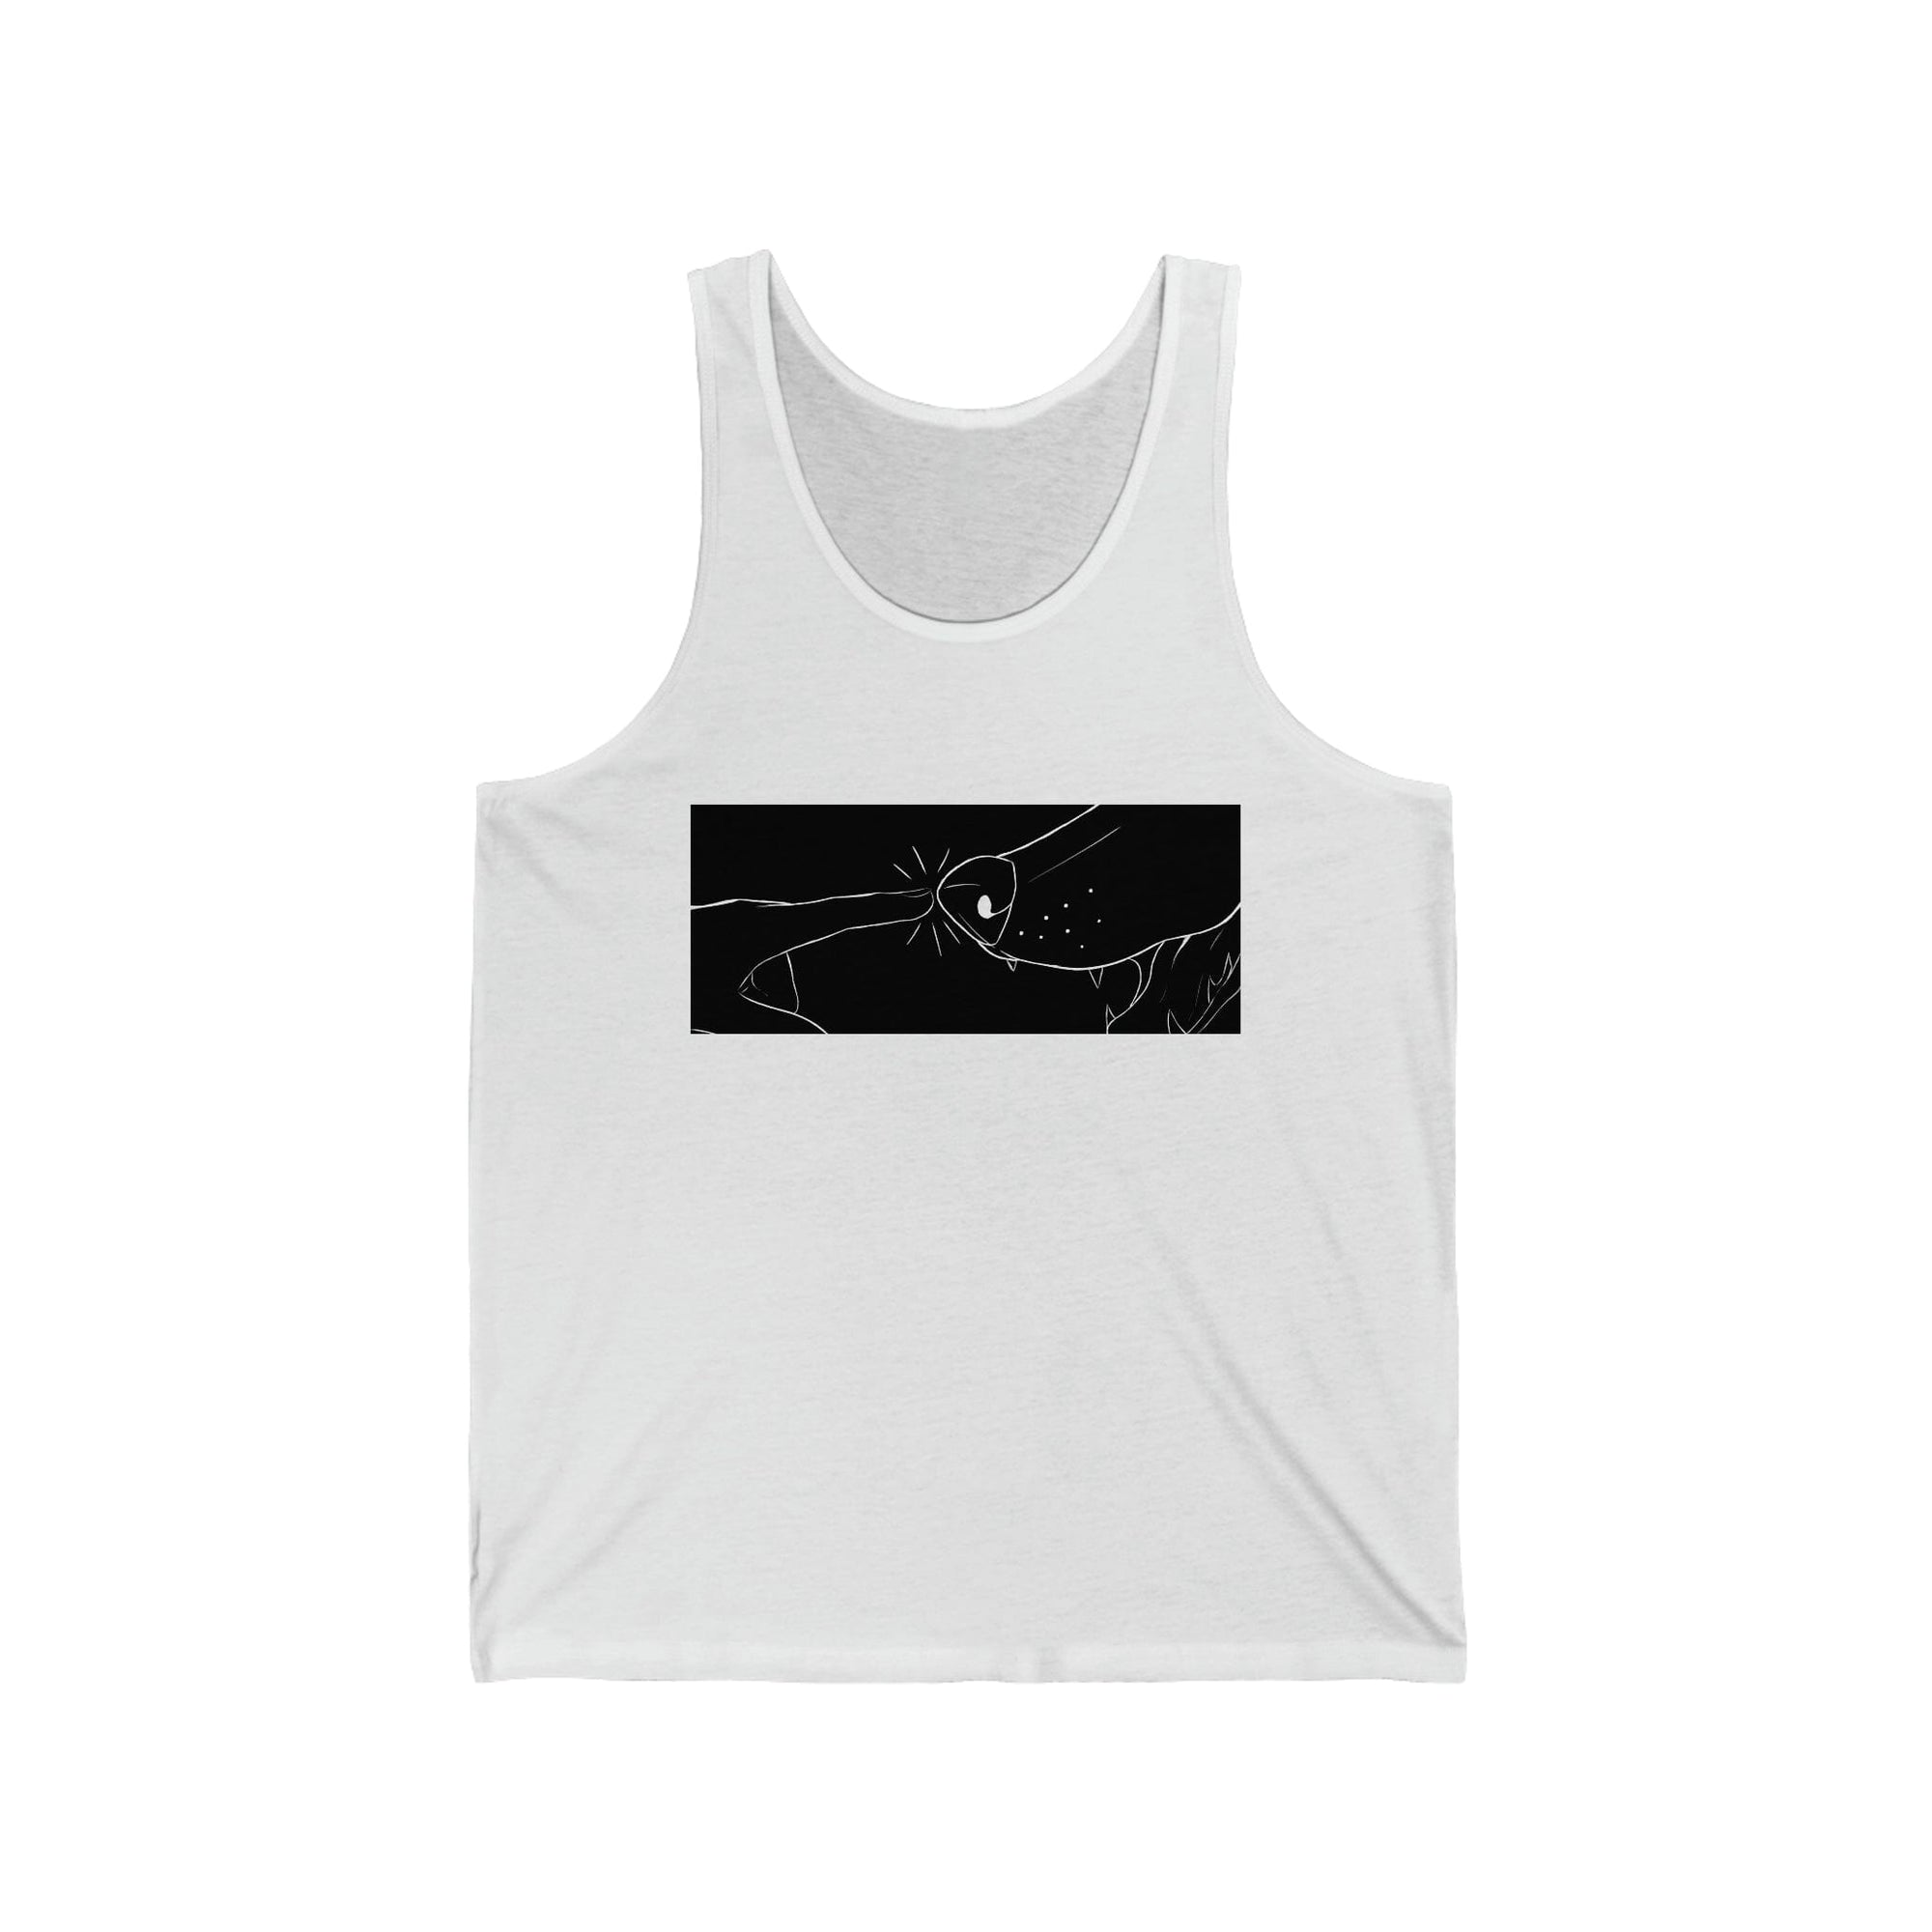 BOOP - Tank Top Tank Top Project Spitfyre White XS 